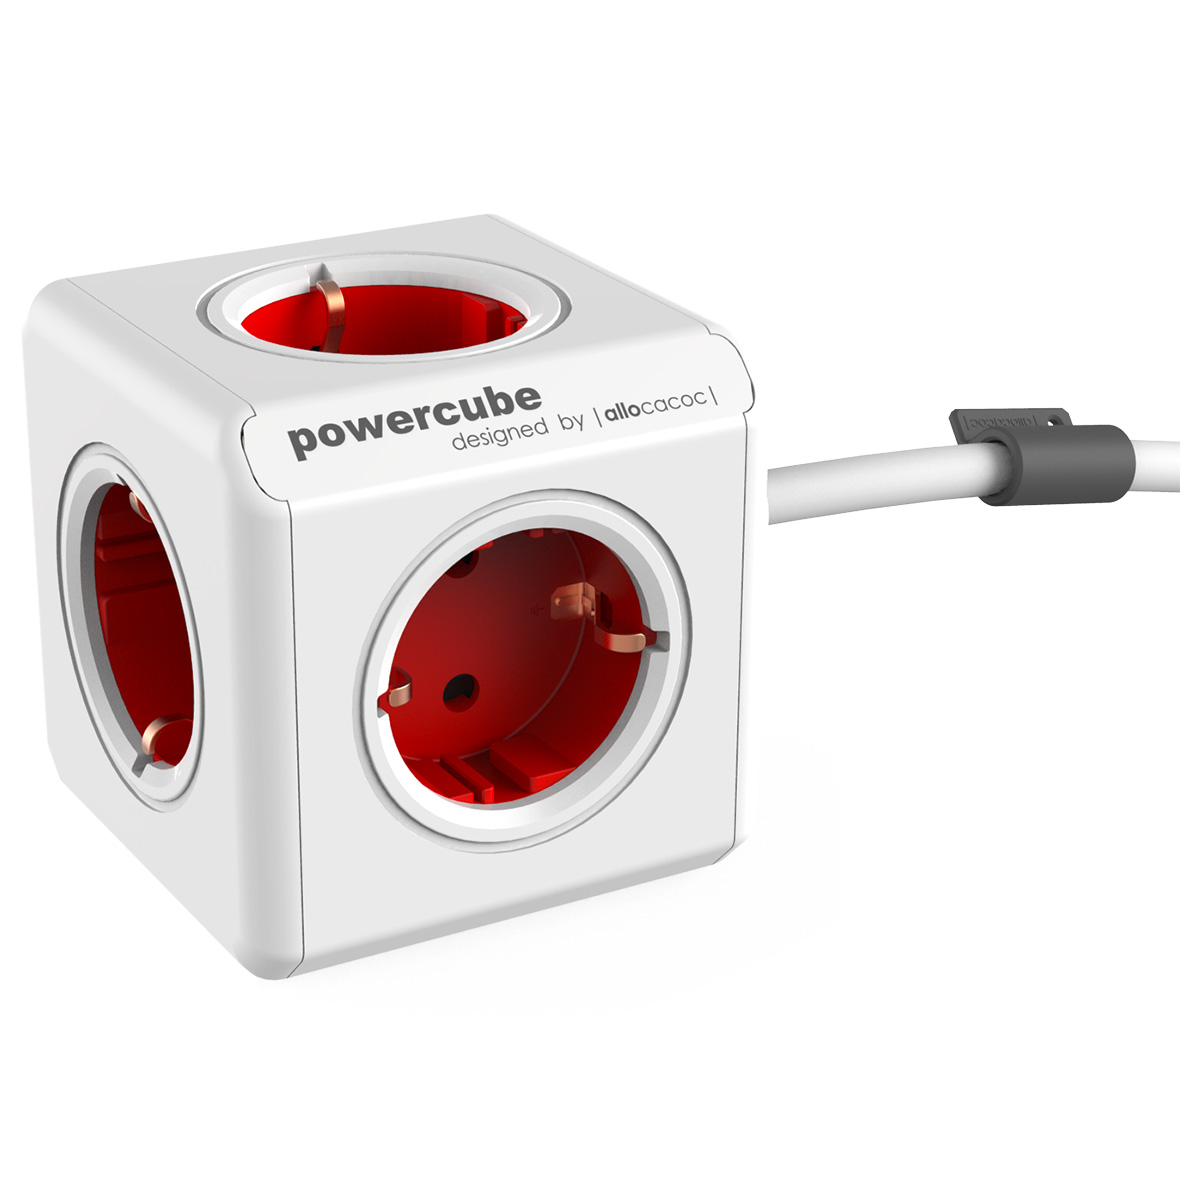 PowerCube Extended with 5 built-in sockets